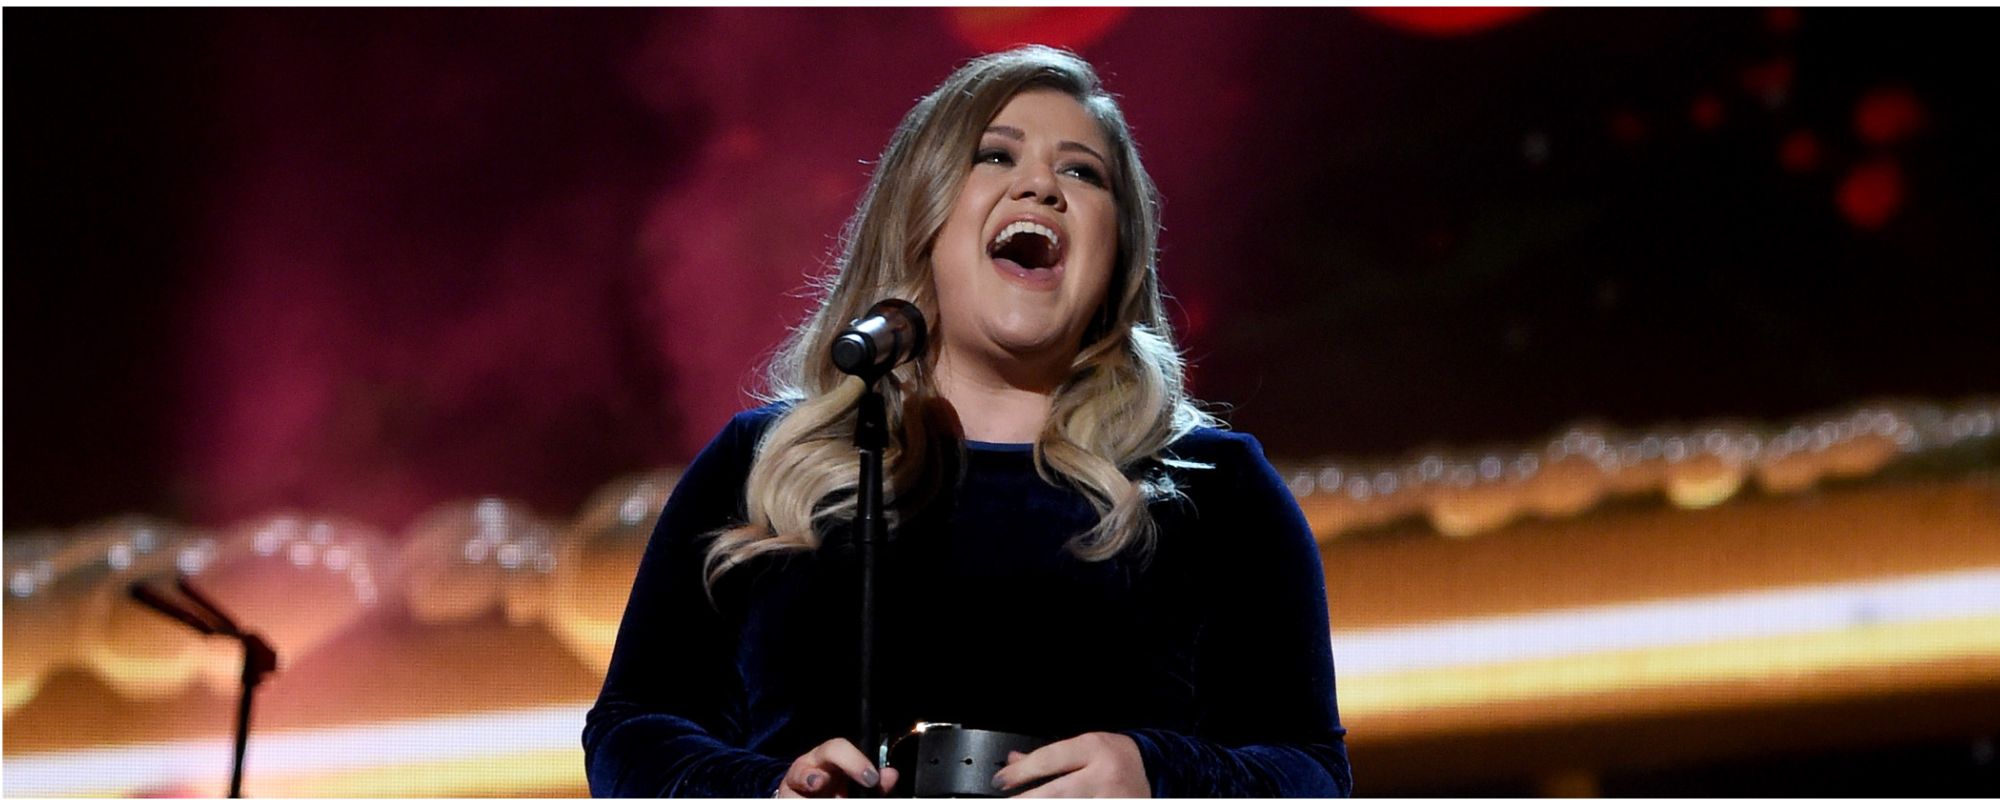 Kelly Clarkson to Host This Year’s ‘Christmas in Rockefeller Center’